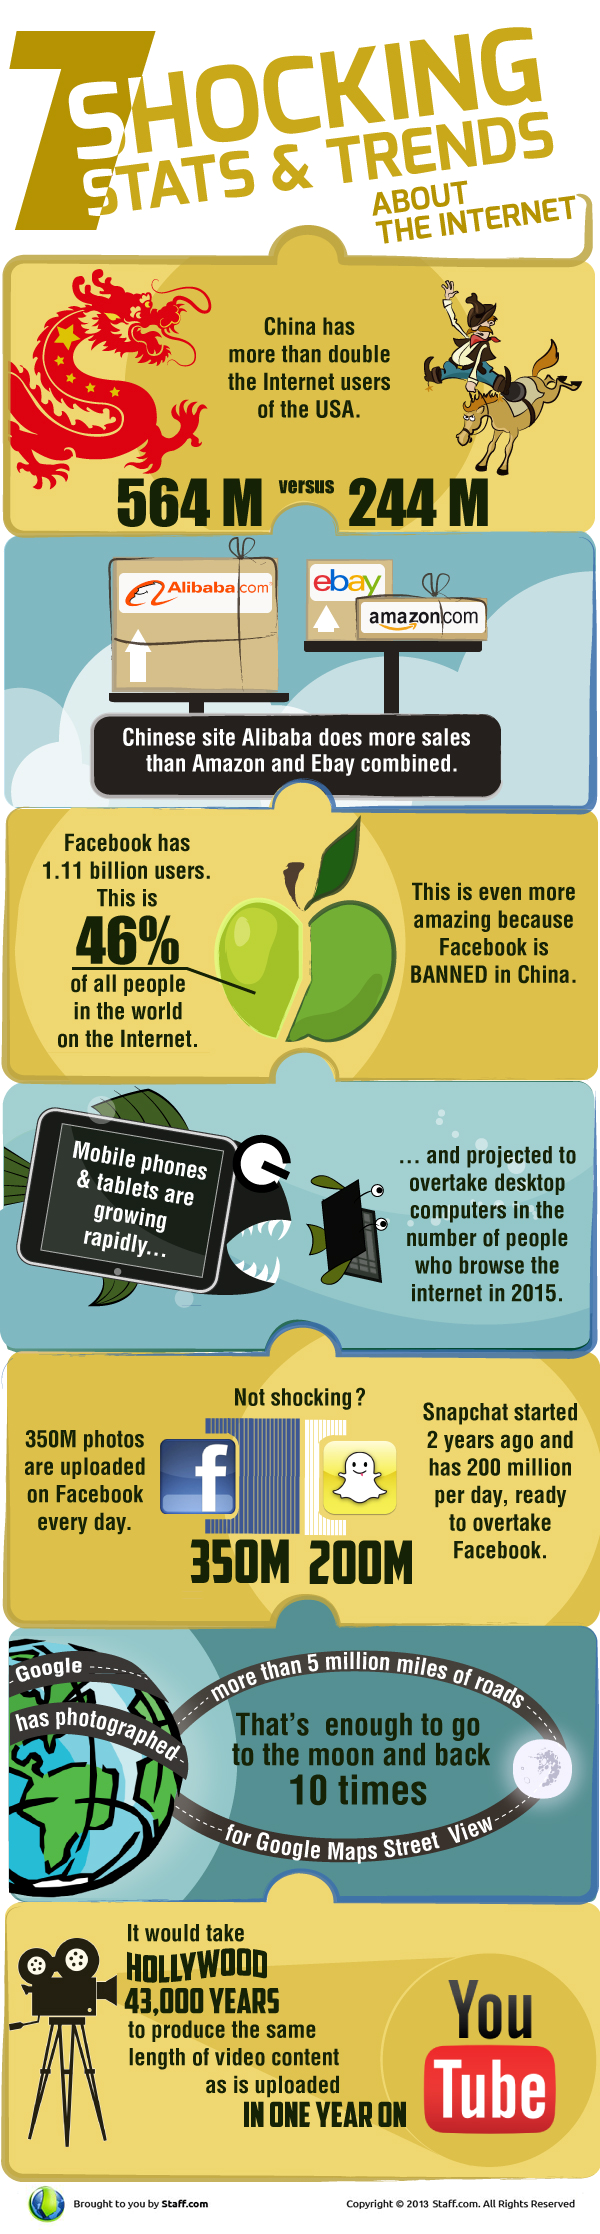 7 Shocking Stats and Trends about the Internet World by Technotipz